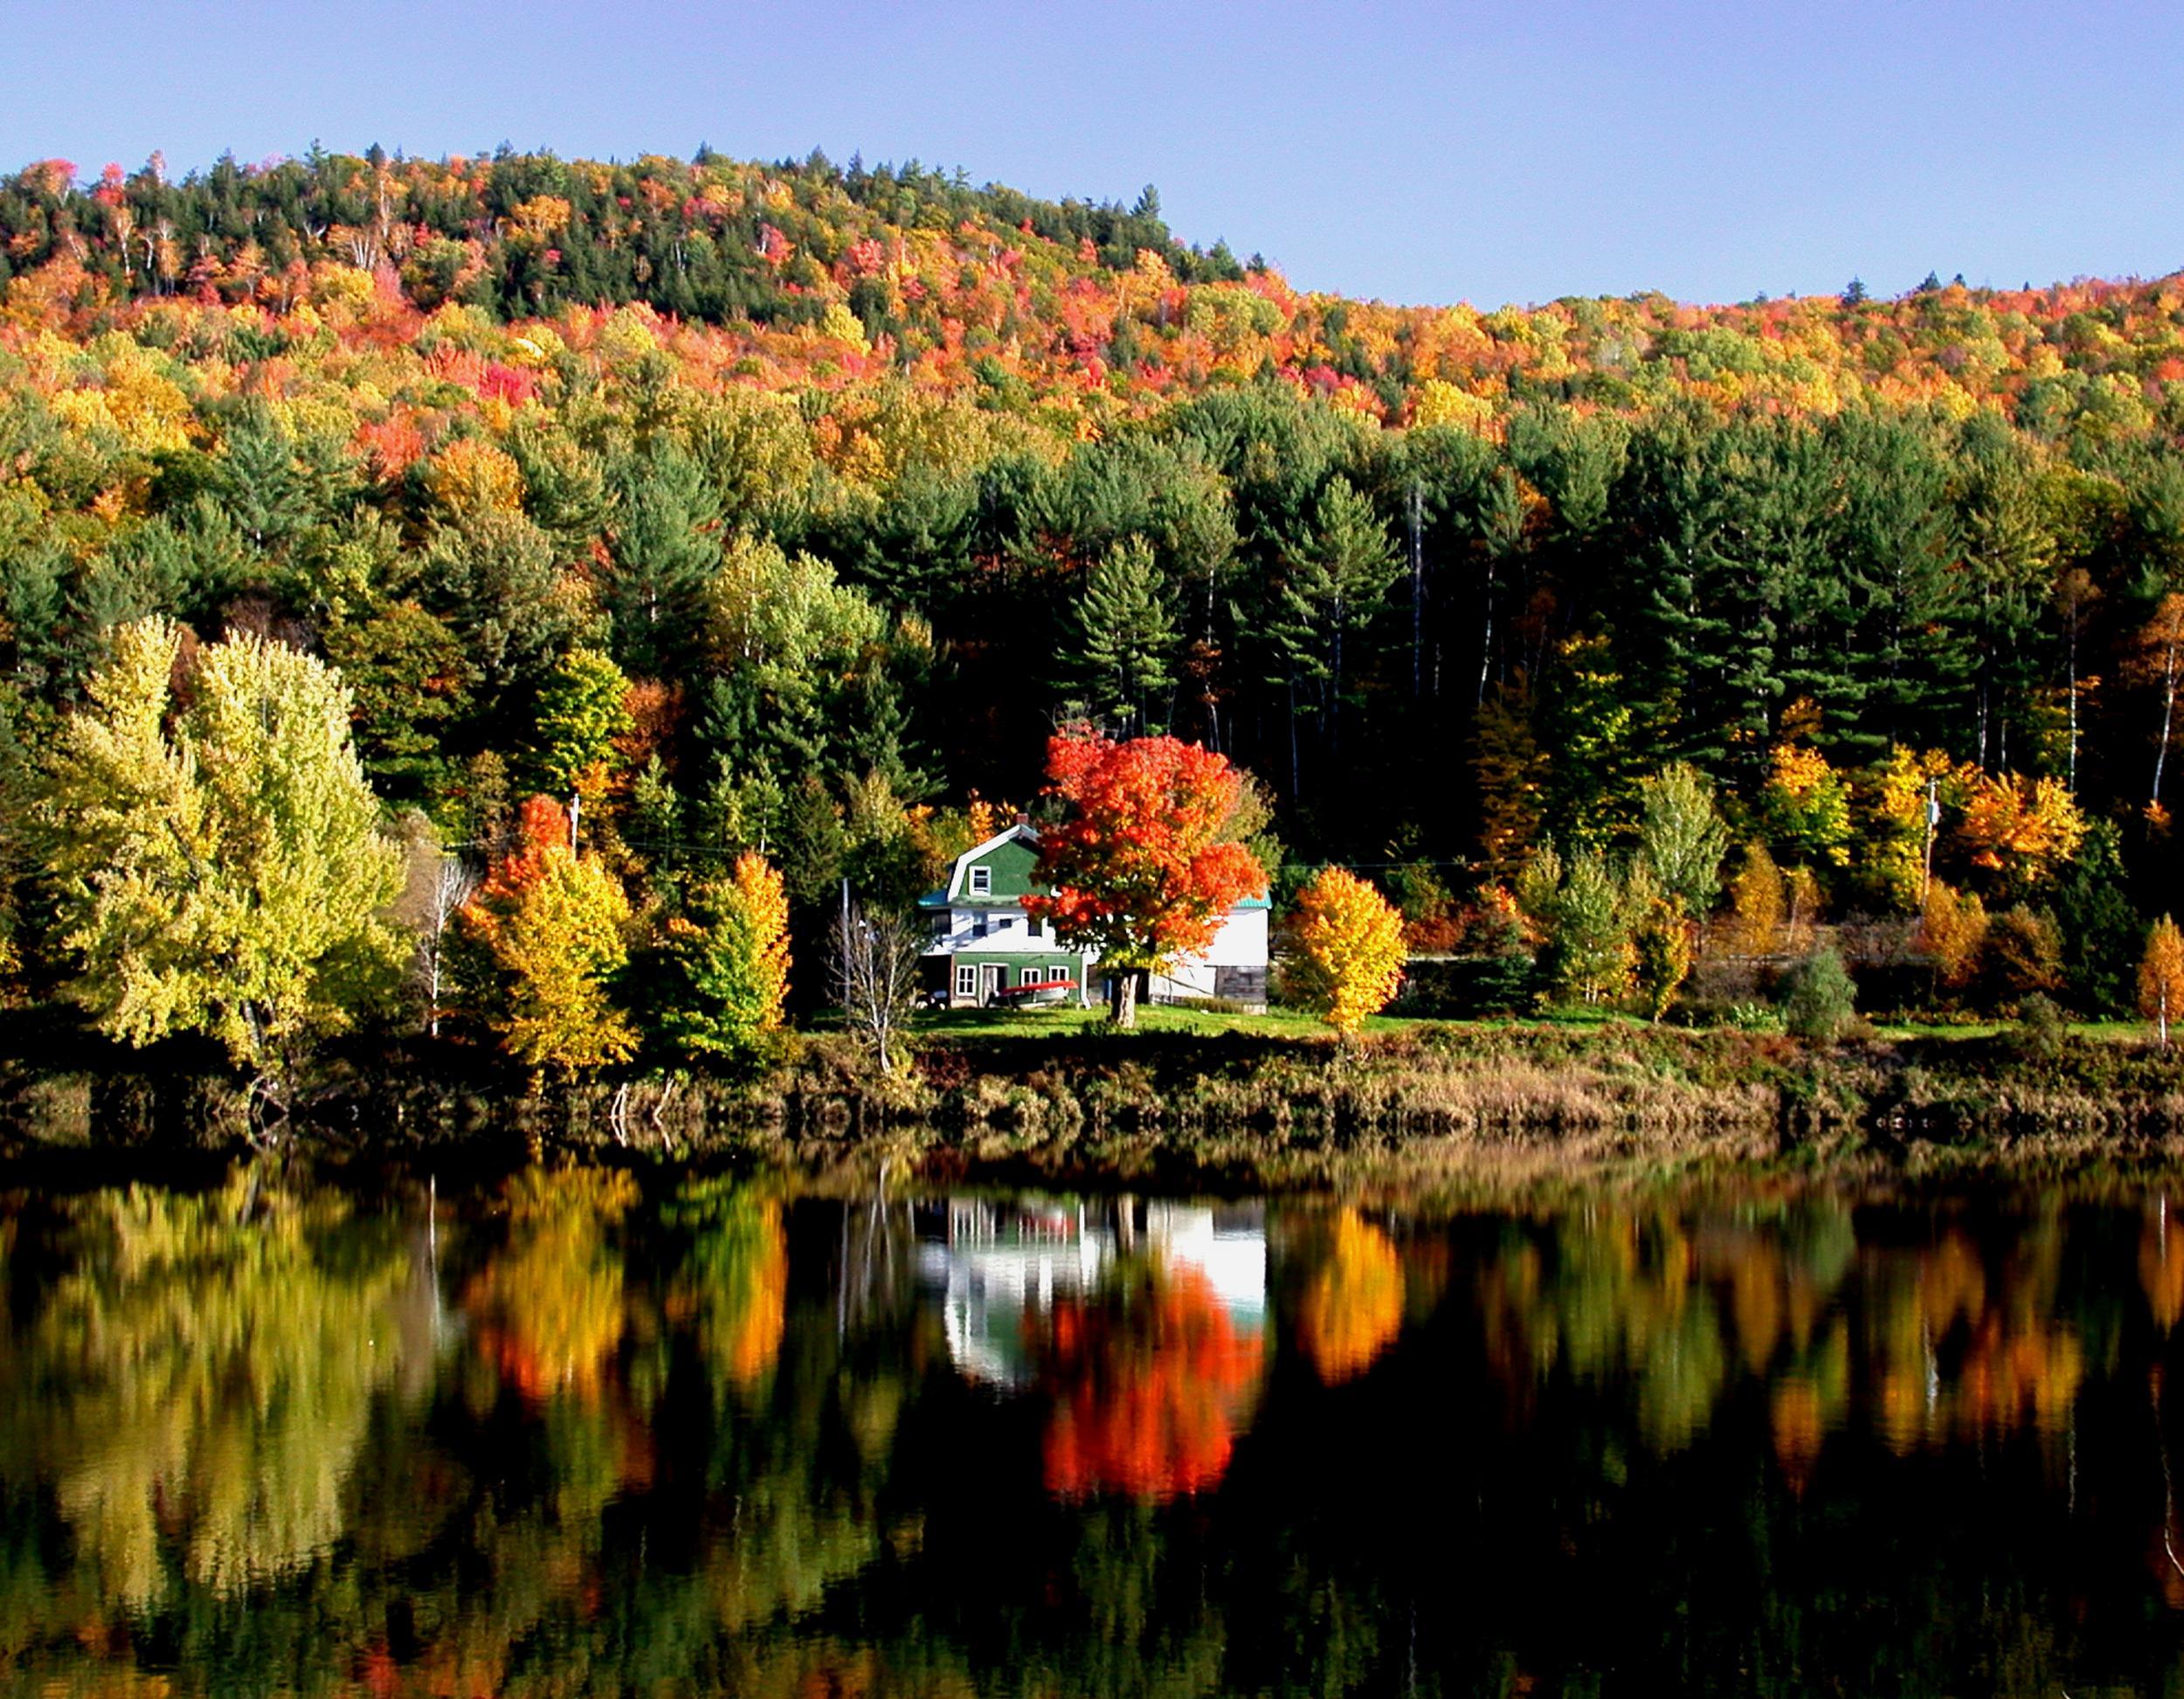 Maine is a classic destination for fall foliage